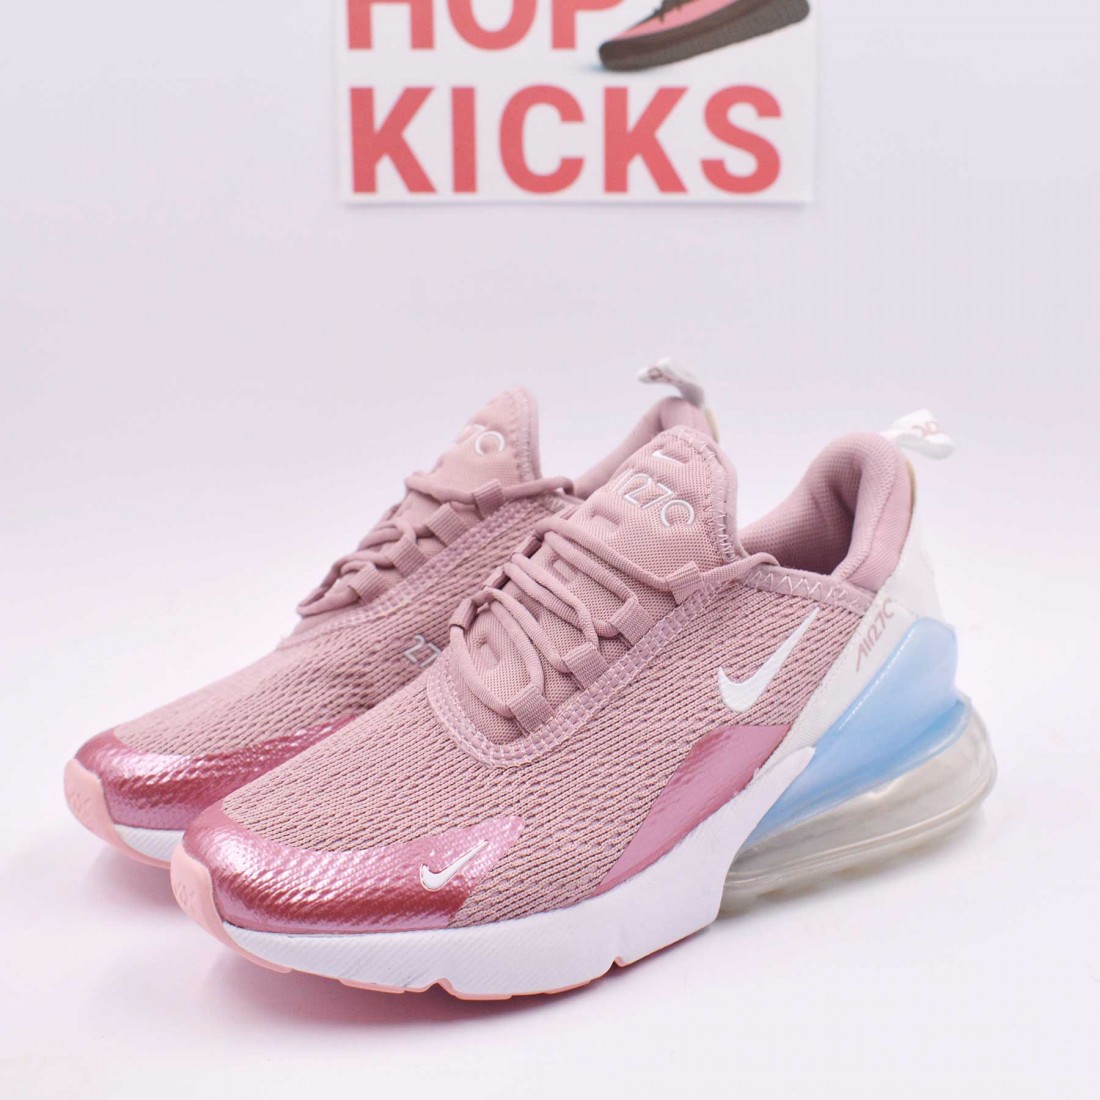 Instant delivery is possible Girls Pink/ White Air Max 